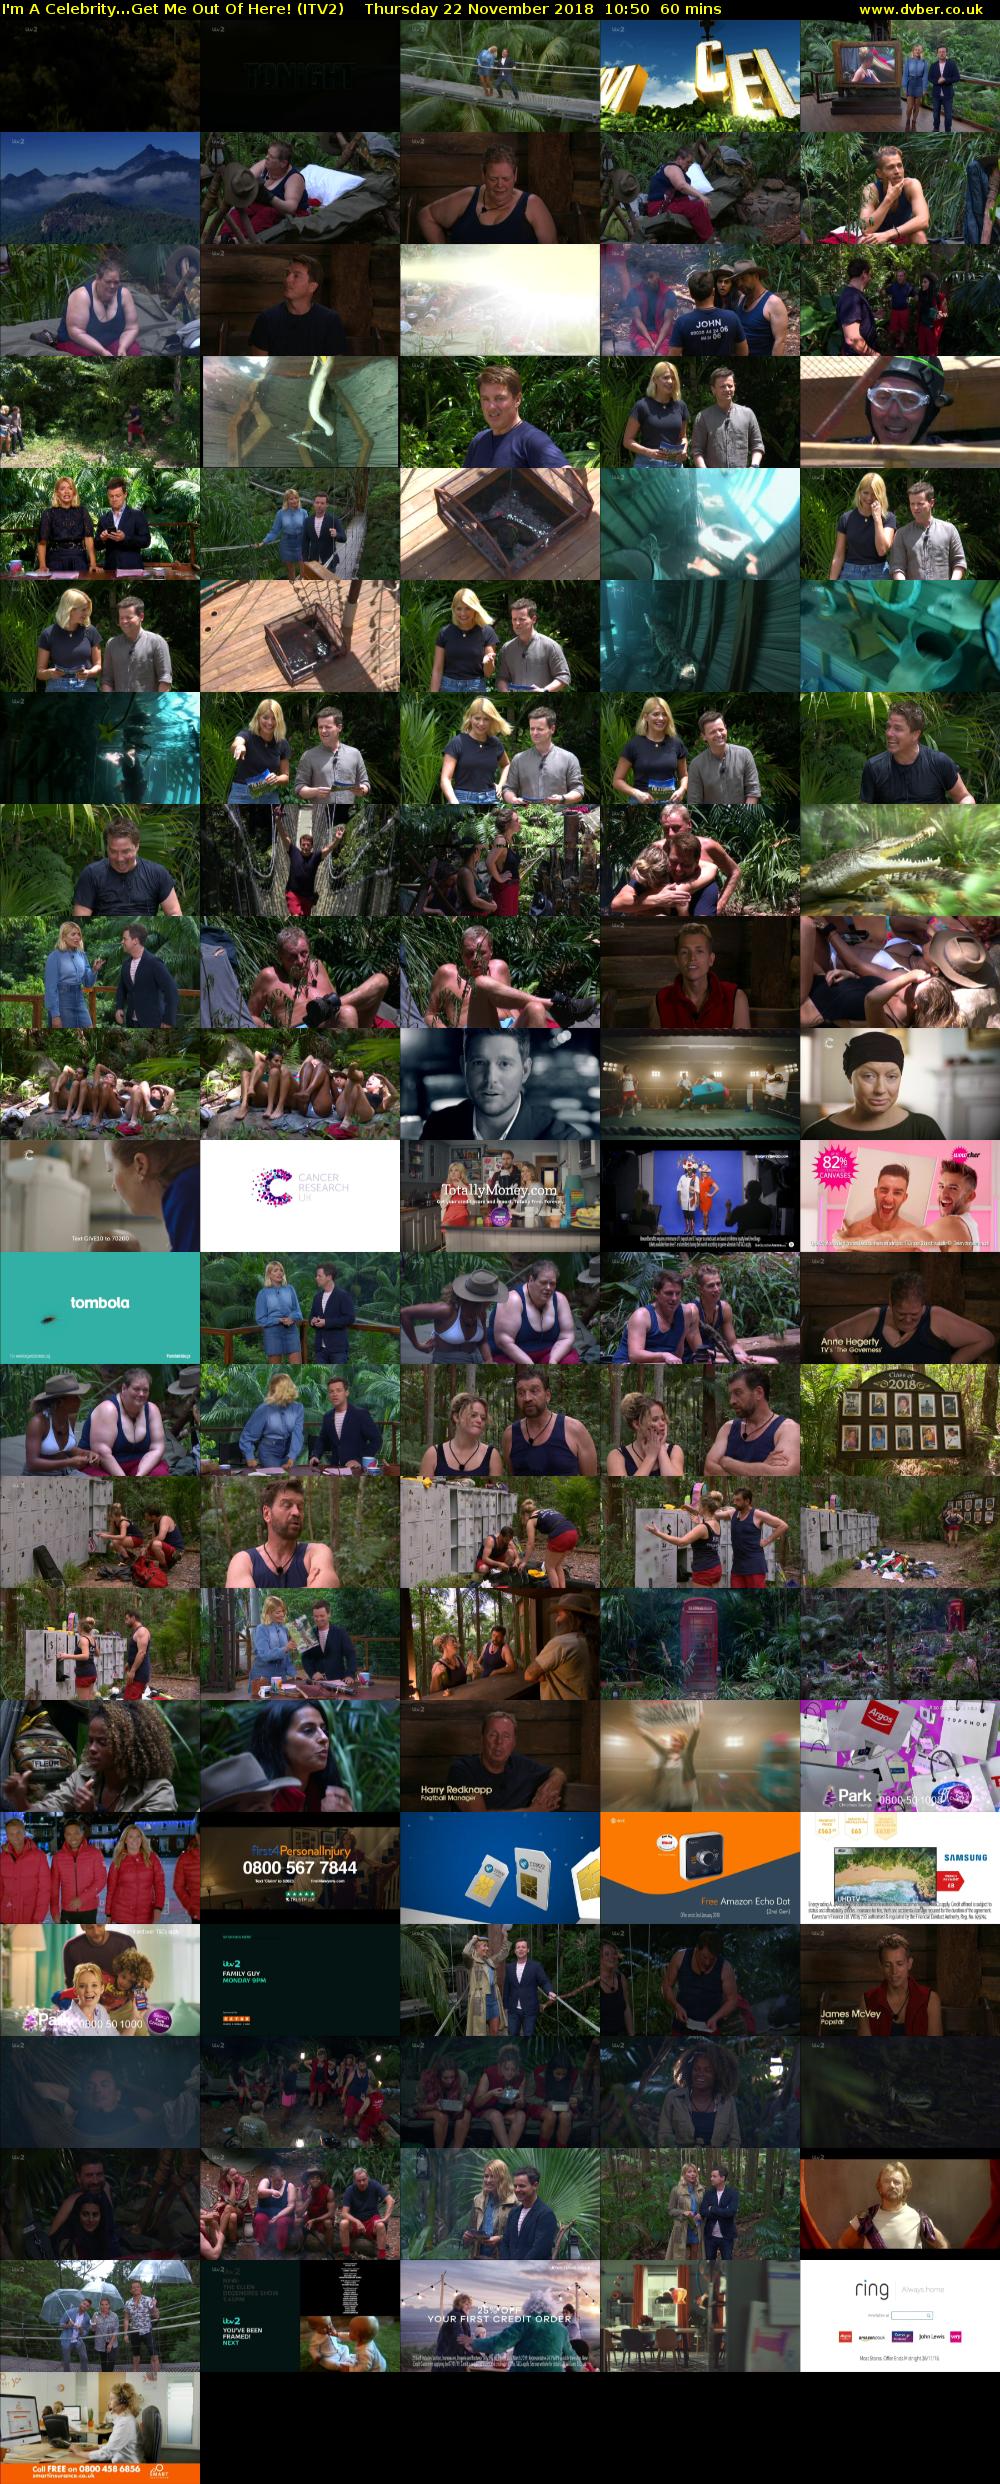 I'm A Celebrity...Get Me Out Of Here! (ITV2) Thursday 22 November 2018 10:50 - 11:50